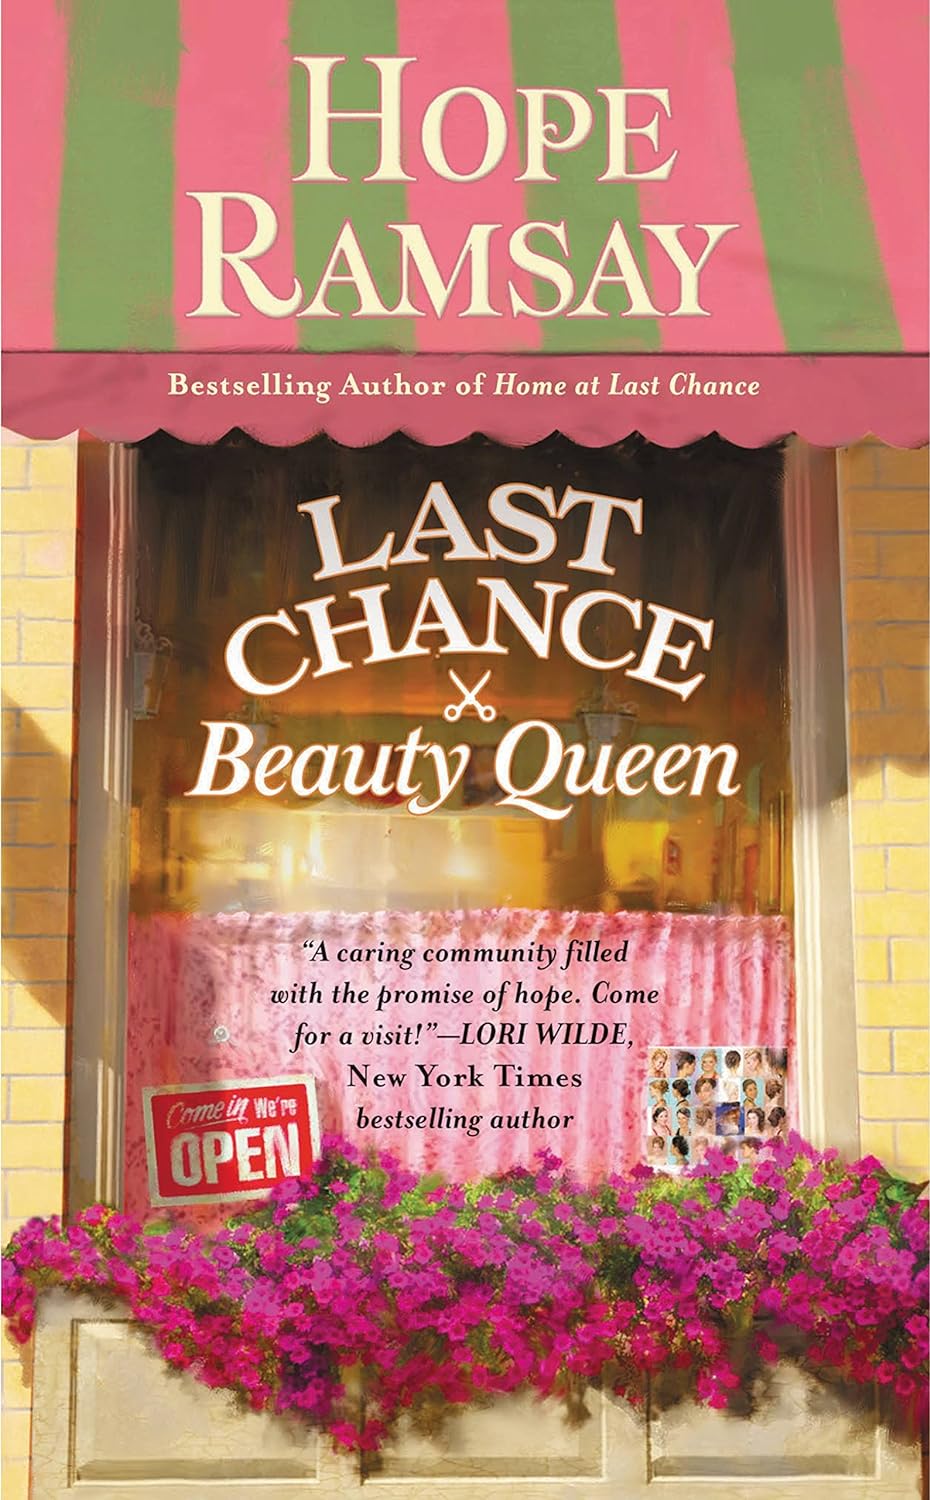 Last Chance Beauty Queen by Hope Ramsey